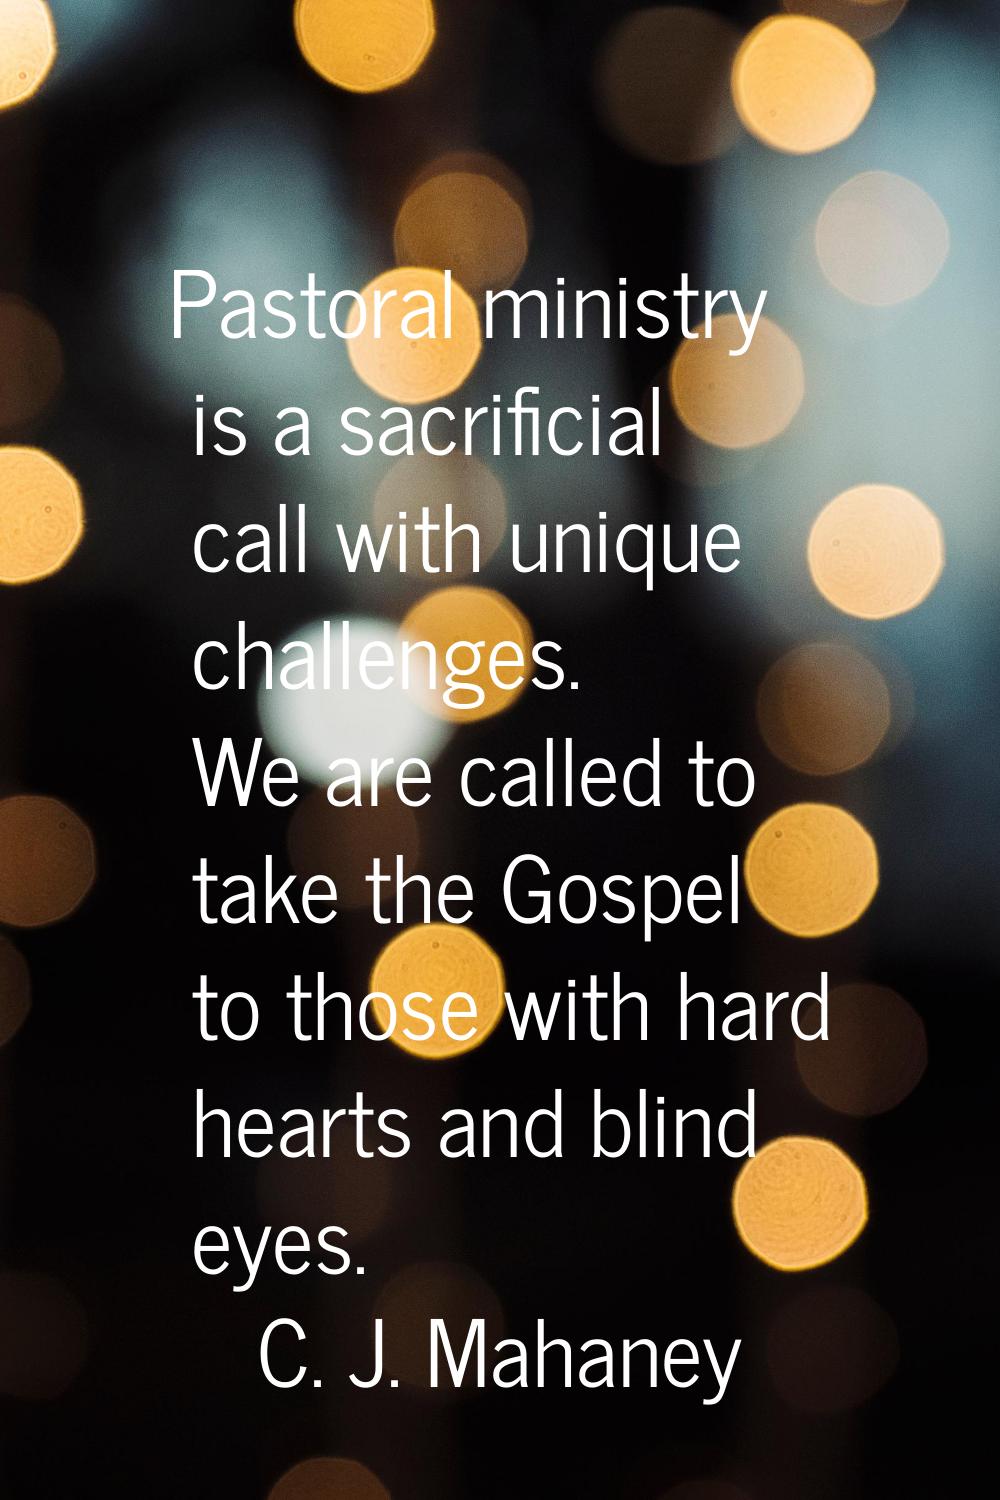 Pastoral ministry is a sacrificial call with unique challenges. We are called to take the Gospel to